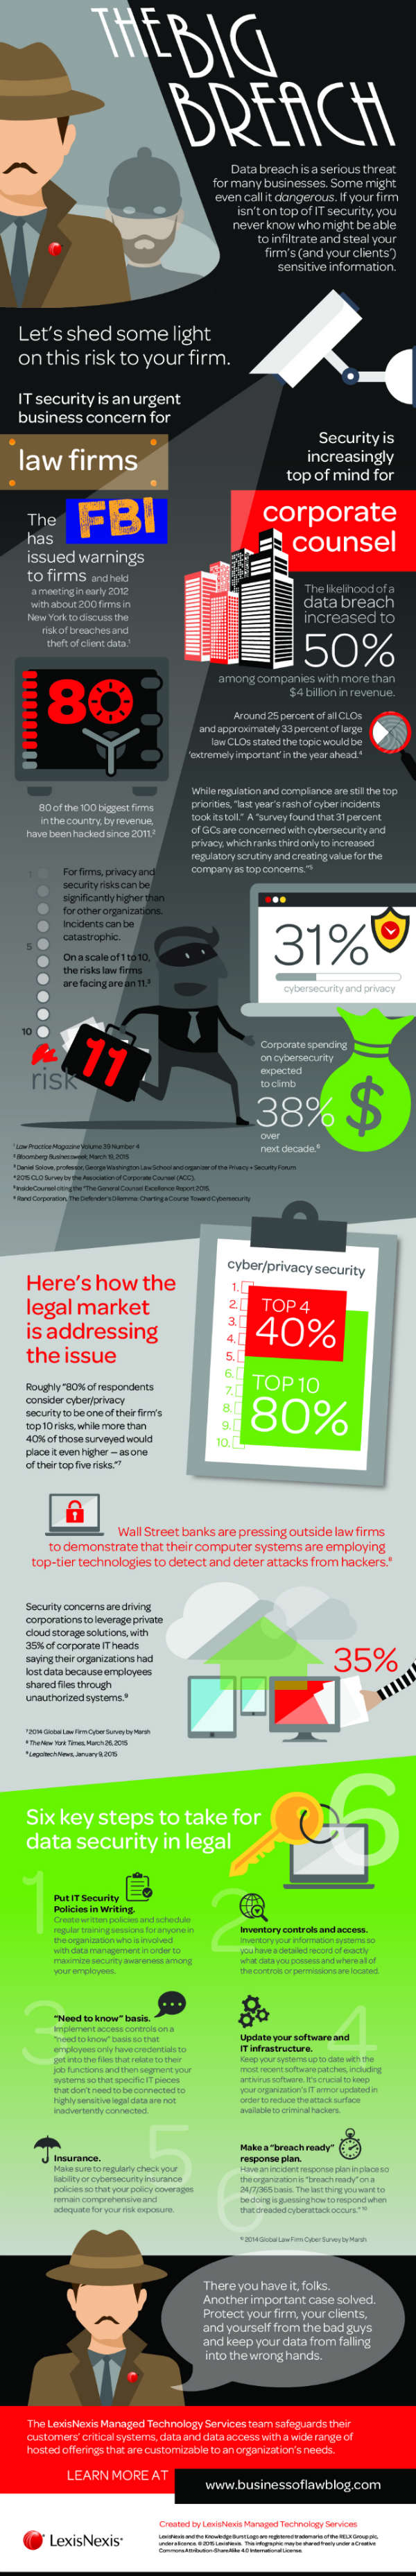 Infographic: Cybersecurity Stats for Legal Tech